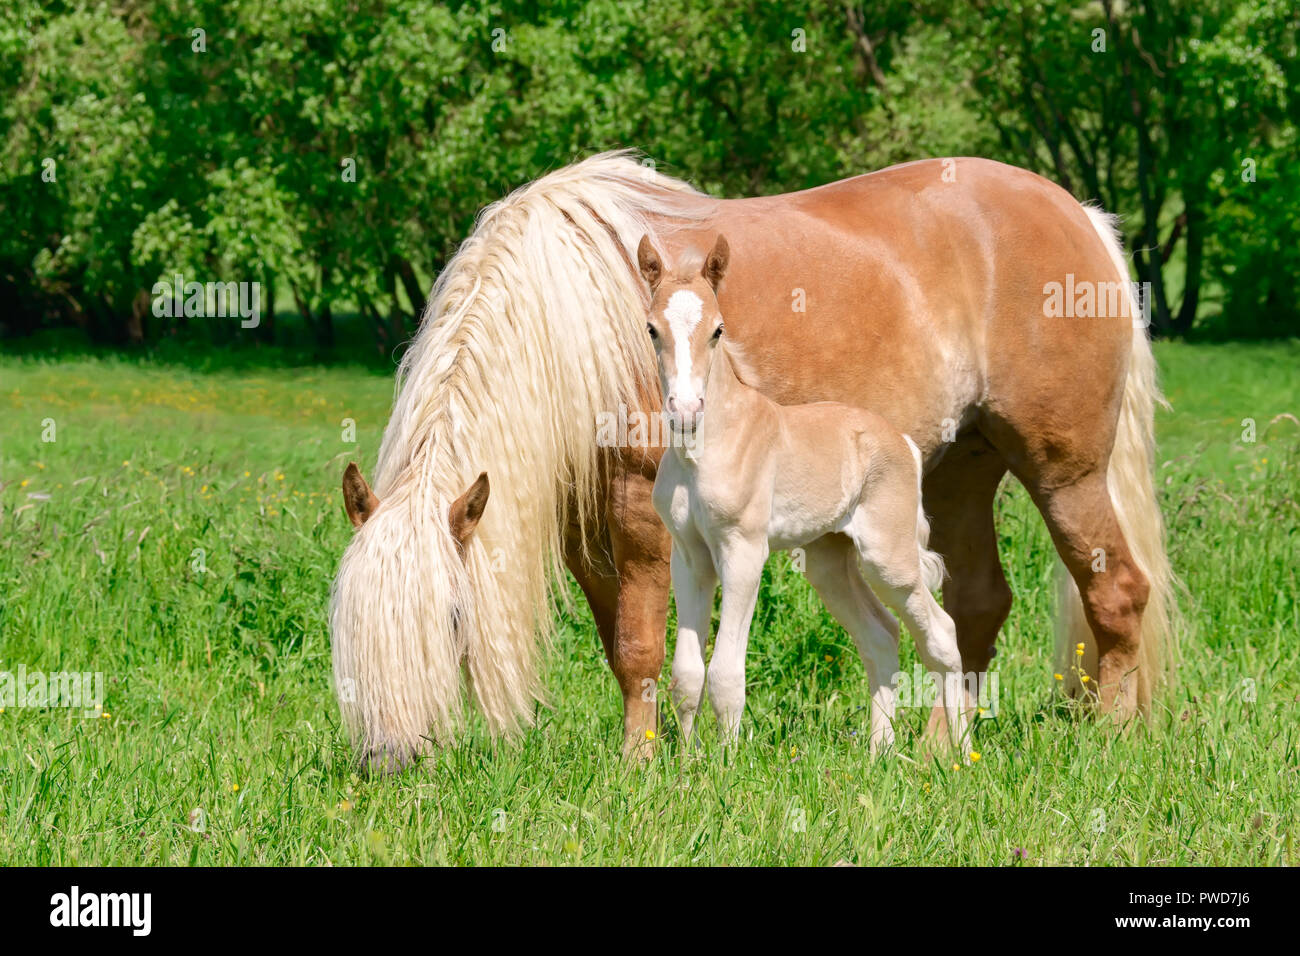 Haflinger horses, mare with a long flaxen mane and her cute foal standing close together in a green grass pasture Stock Photo